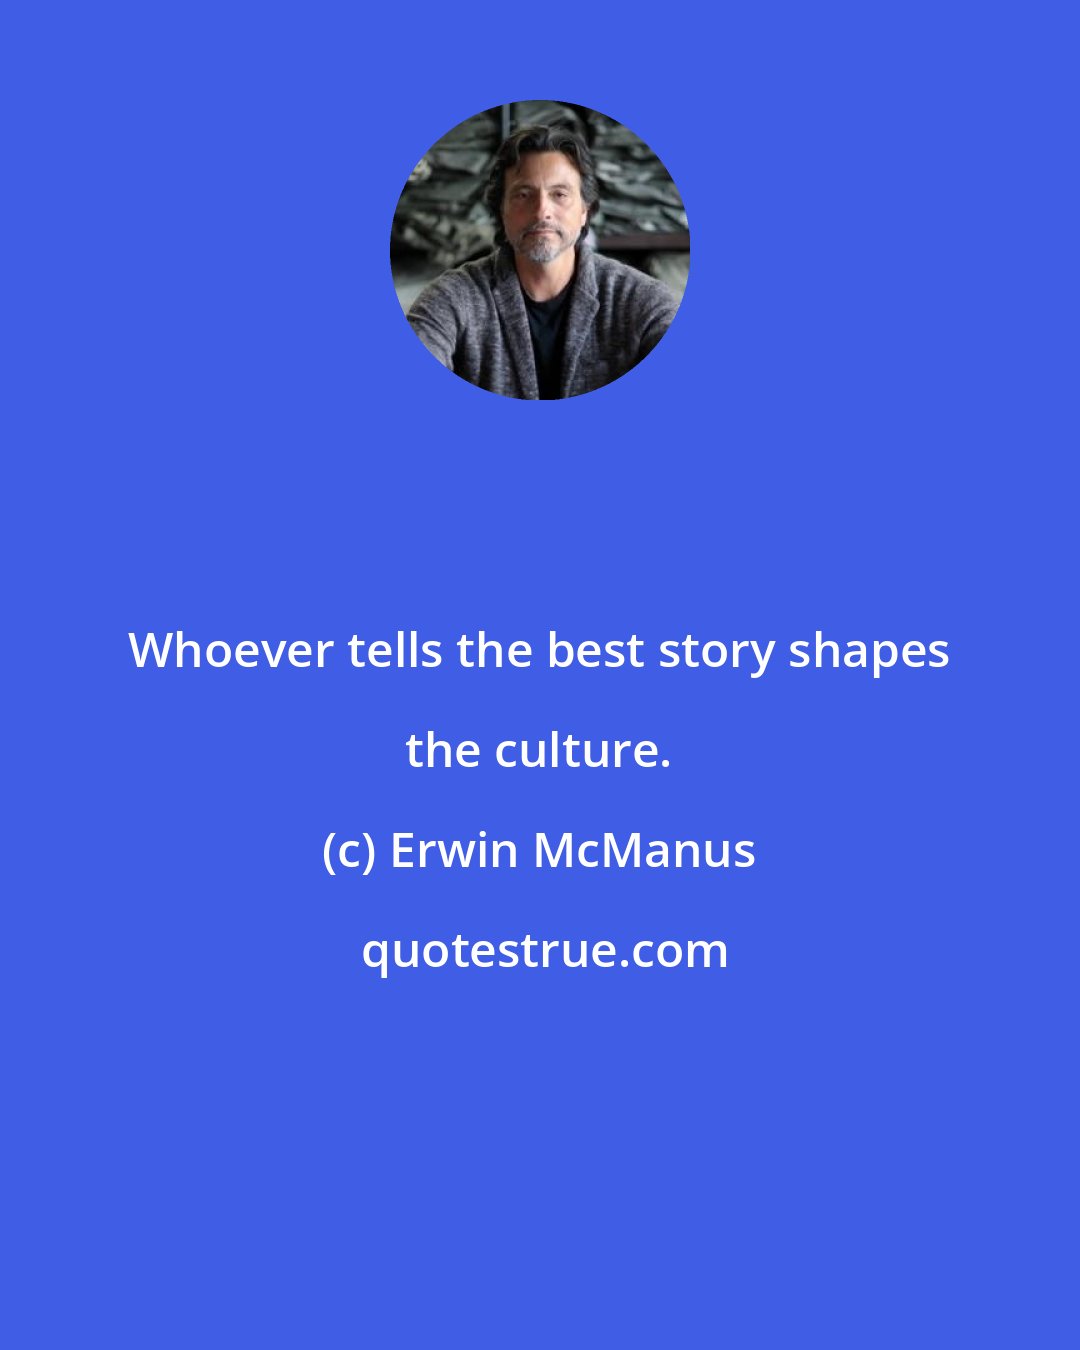 Erwin McManus: Whoever tells the best story shapes the culture.